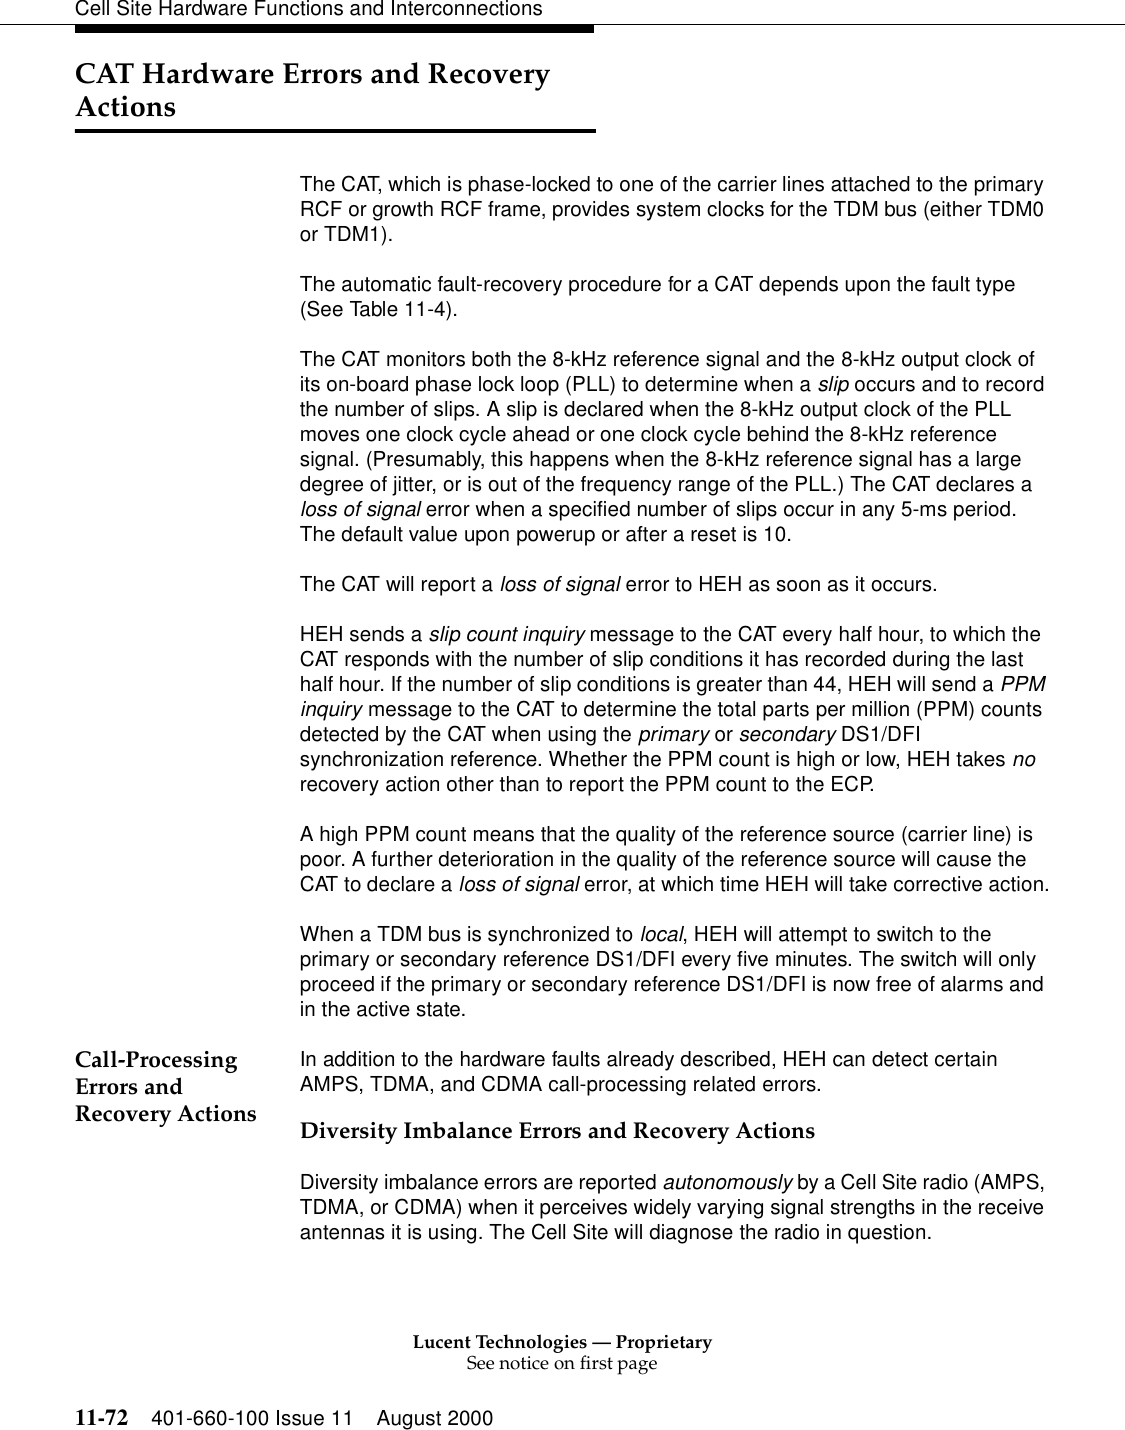 Lucent Technologies — ProprietarySee notice on first page11-72 401-660-100 Issue 11 August 2000Cell Site Hardware Functions and InterconnectionsCAT Hardware Errors and Recovery ActionsThe CAT, which is phase-locked to one of the carrier lines attached to the primary RCF or growth RCF frame, provides system clocks for the TDM bus (either TDM0 or TDM1).The automatic fault-recovery procedure for a CAT depends upon the fault type (See Table 11-4).The CAT monitors both the 8-kHz reference signal and the 8-kHz output clock of its on-board phase lock loop (PLL) to determine when a slip occurs and to record the number of slips. A slip is declared when the 8-kHz output clock of the PLL moves one clock cycle ahead or one clock cycle behind the 8-kHz reference signal. (Presumably, this happens when the 8-kHz reference signal has a large degree of jitter, or is out of the frequency range of the PLL.) The CAT declares a loss of signal error when a specified number of slips occur in any 5-ms period. The default value upon powerup or after a reset is 10.The CAT will report a loss of signal error to HEH as soon as it occurs.HEH sends a slip count inquiry message to the CAT every half hour, to which the CAT responds with the number of slip conditions it has recorded during the last half hour. If the number of slip conditions is greater than 44, HEH will send a PPM inquiry message to the CAT to determine the total parts per million (PPM) counts detected by the CAT when using the primary or secondary DS1/DFI synchronization reference. Whether the PPM count is high or low, HEH takes no recovery action other than to report the PPM count to the ECP.A high PPM count means that the quality of the reference source (carrier line) is poor. A further deterioration in the quality of the reference source will cause the CAT to declare a loss of signal error, at which time HEH will take corrective action.When a TDM bus is synchronized to local, HEH will attempt to switch to the primary or secondary reference DS1/DFI every five minutes. The switch will only proceed if the primary or secondary reference DS1/DFI is now free of alarms and in the active state.Call-Processing Errors and Recovery ActionsIn addition to the hardware faults already described, HEH can detect certain AMPS, TDMA, and CDMA call-processing related errors.Diversity Imbalance Errors and Recovery ActionsDiversity imbalance errors are reported autonomously by a Cell Site radio (AMPS, TDMA, or CDMA) when it perceives widely varying signal strengths in the receive antennas it is using. The Cell Site will diagnose the radio in question.